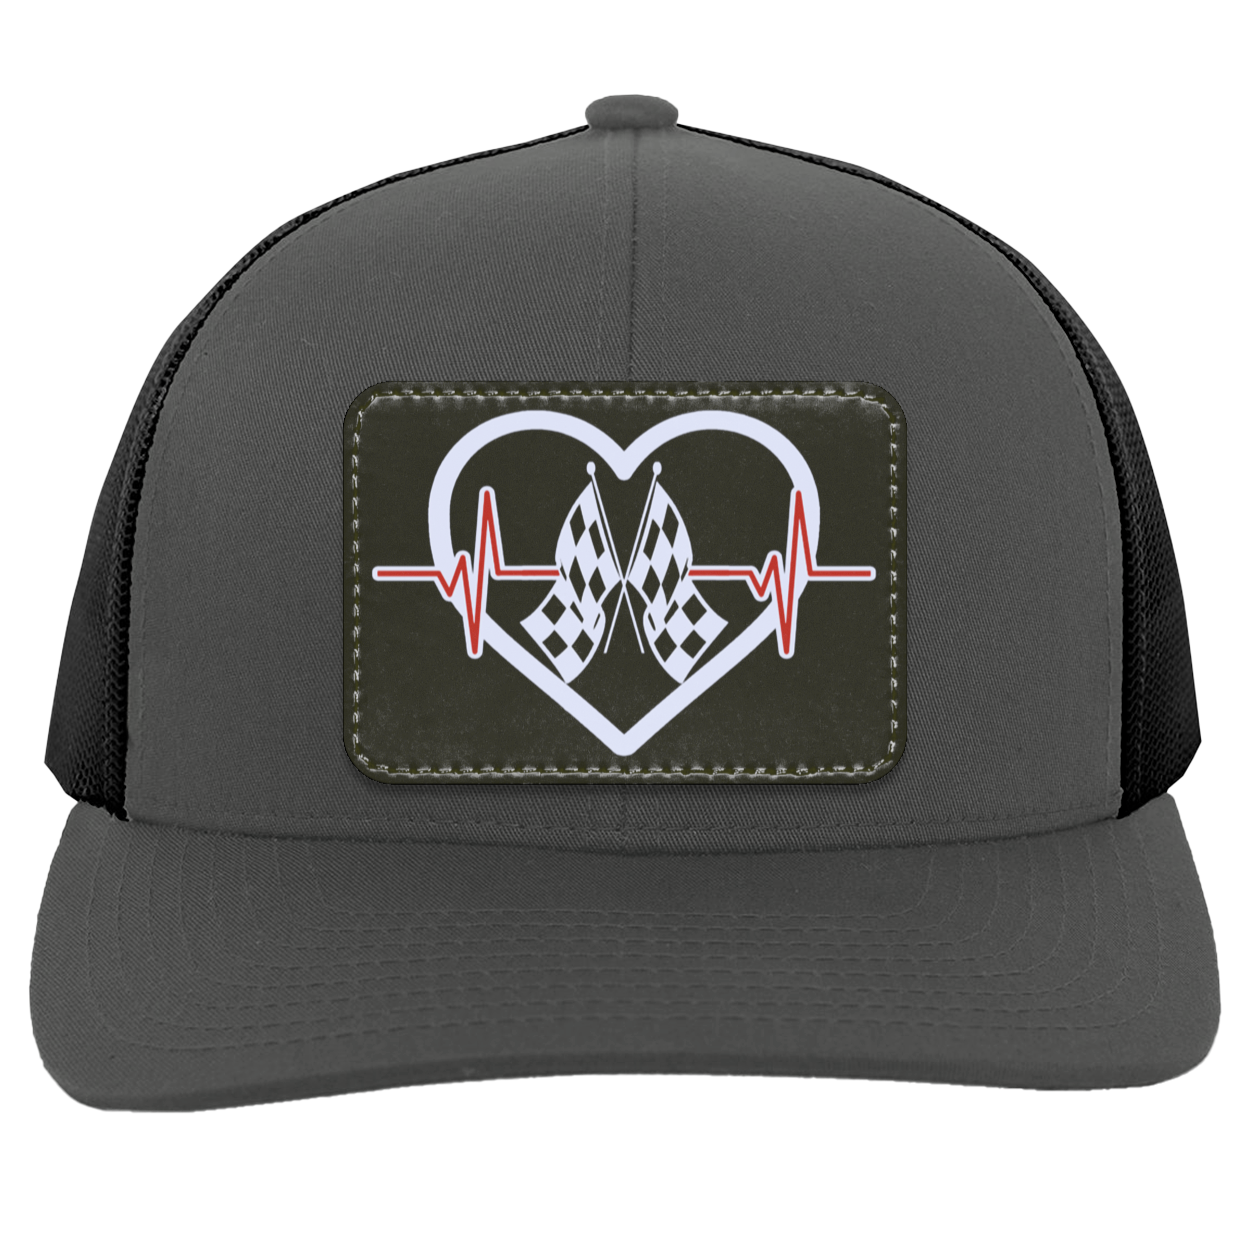 Racing Heartbeat Trucker Patched Snap Back